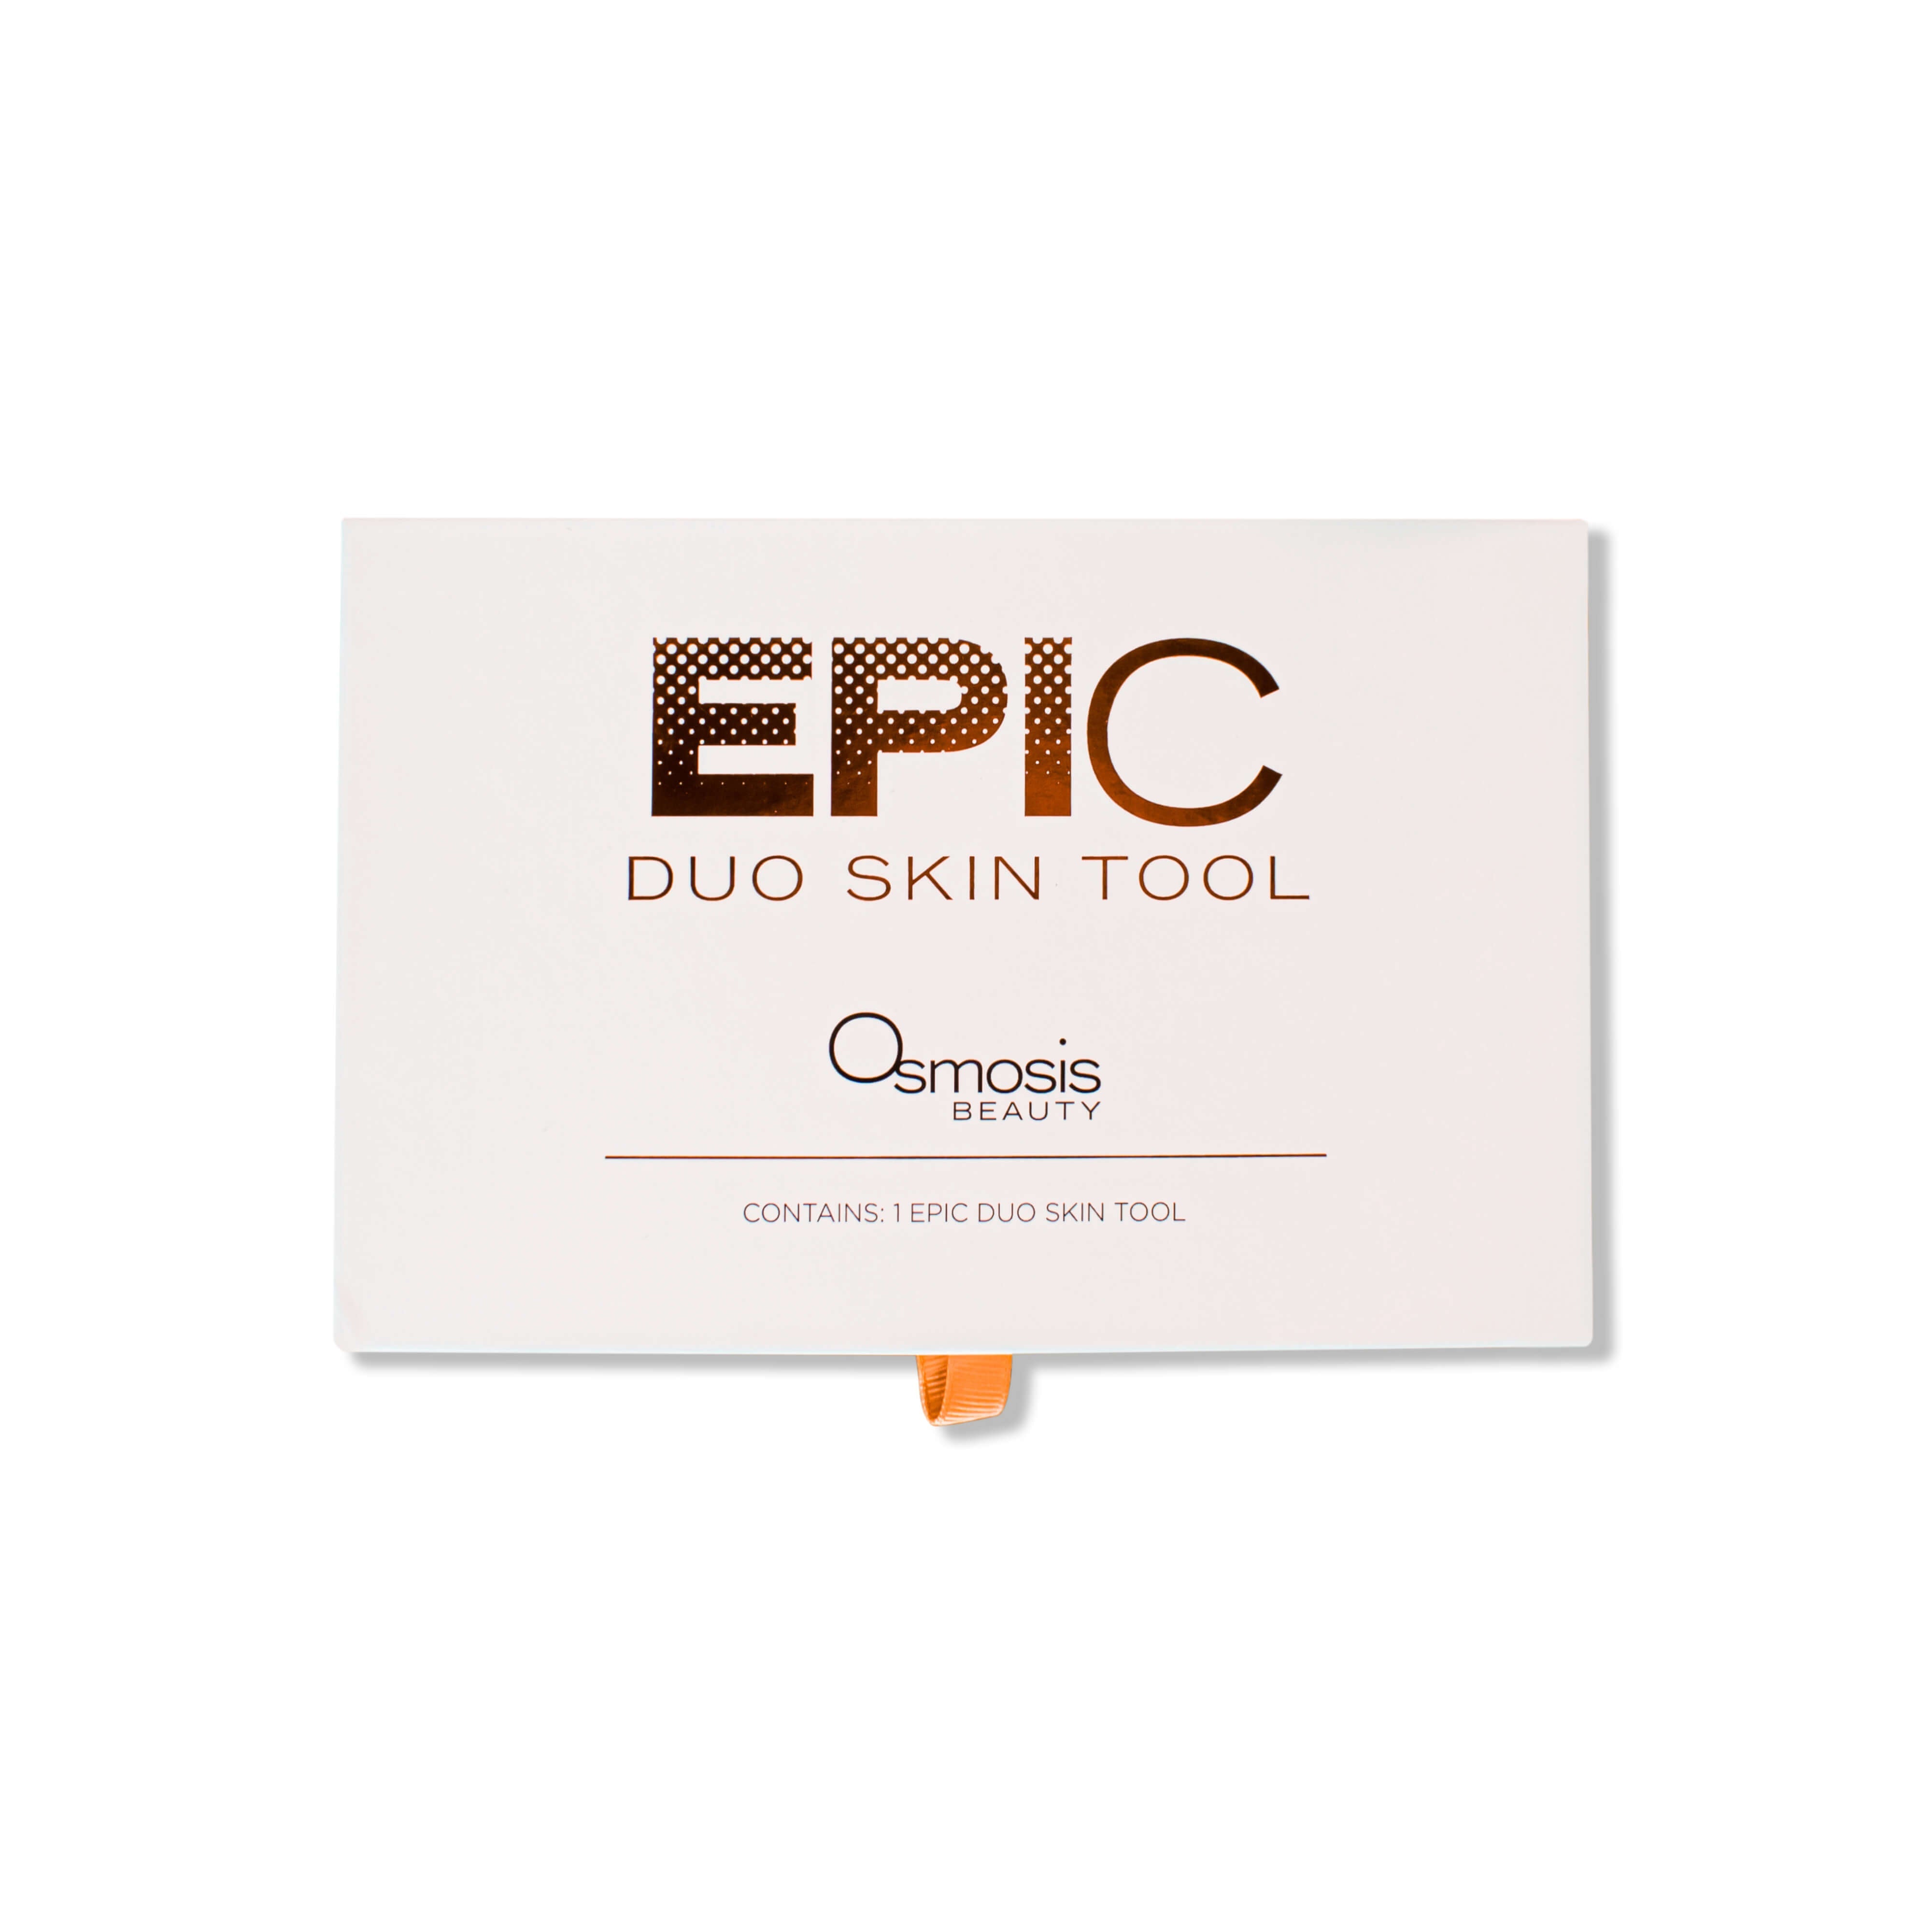 epic duo skin tool box closed on white background